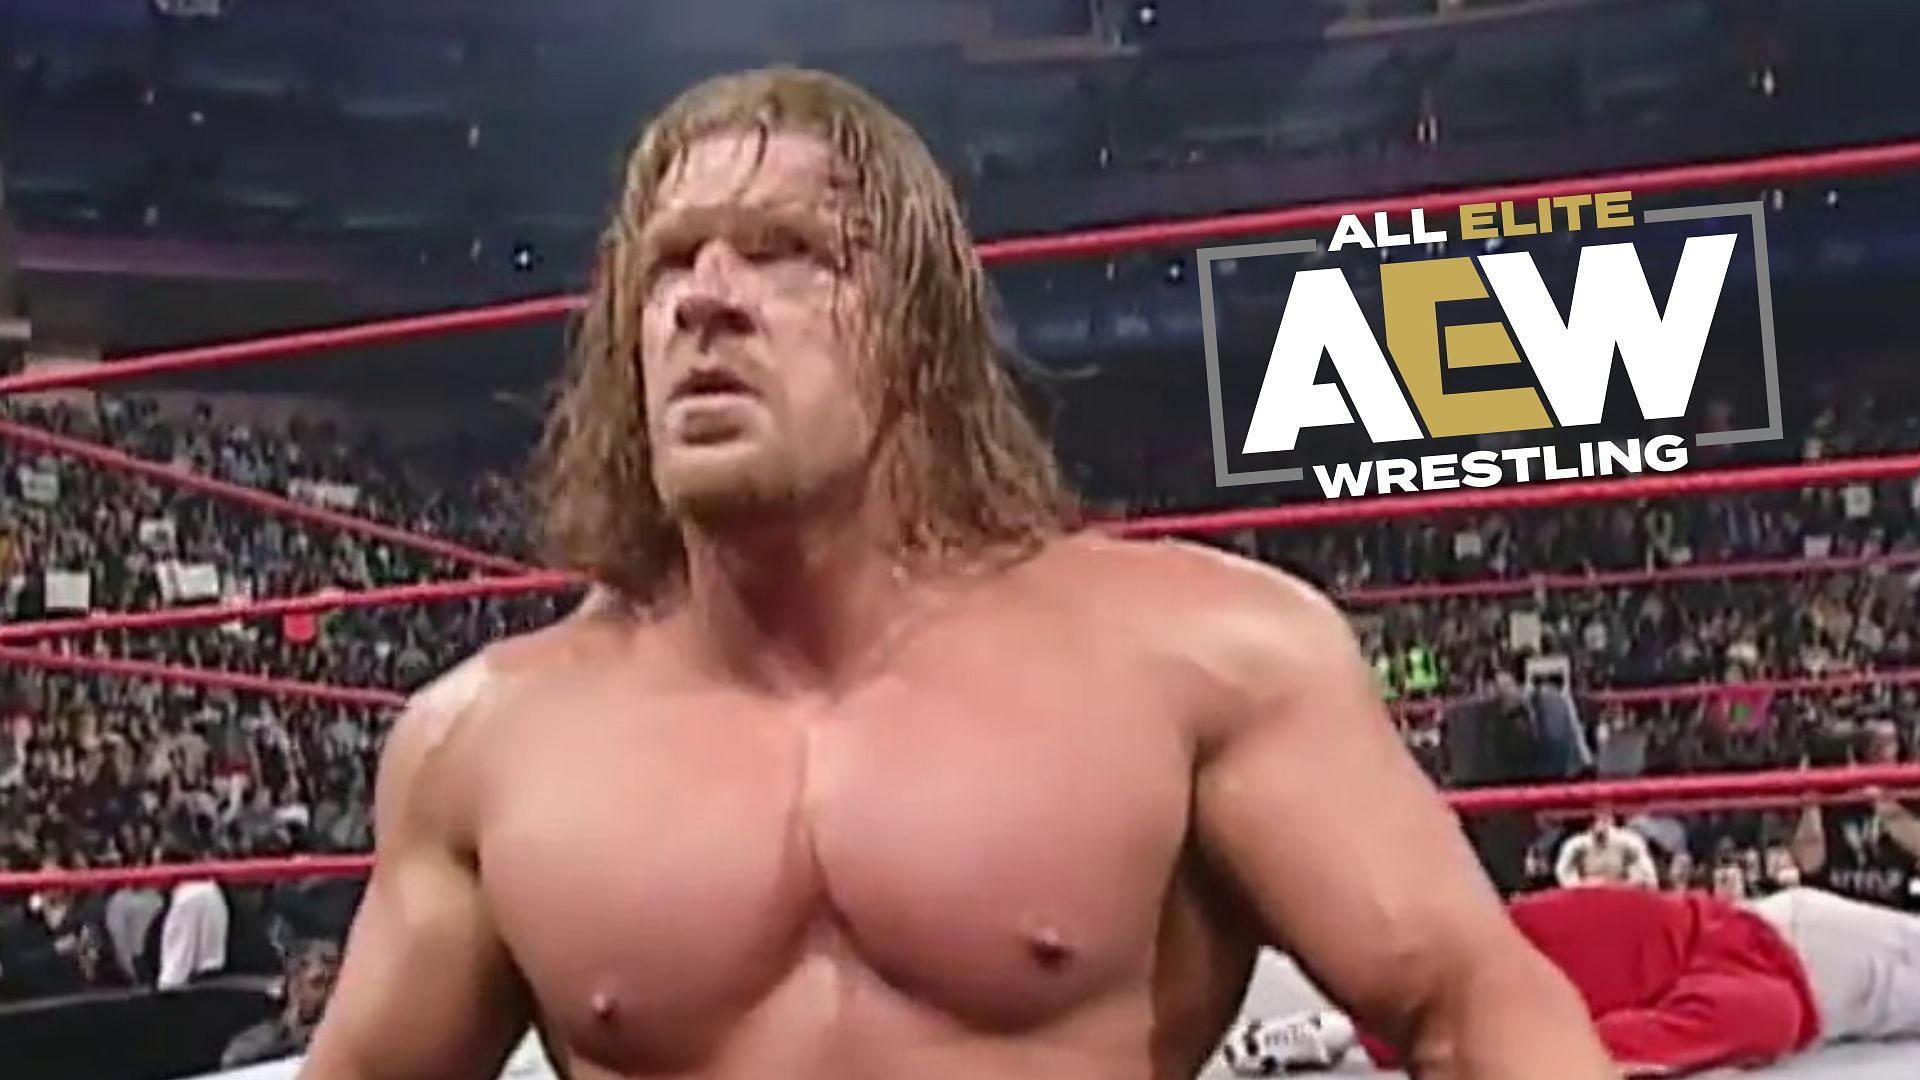 Triple H at a WWE event in January 2002